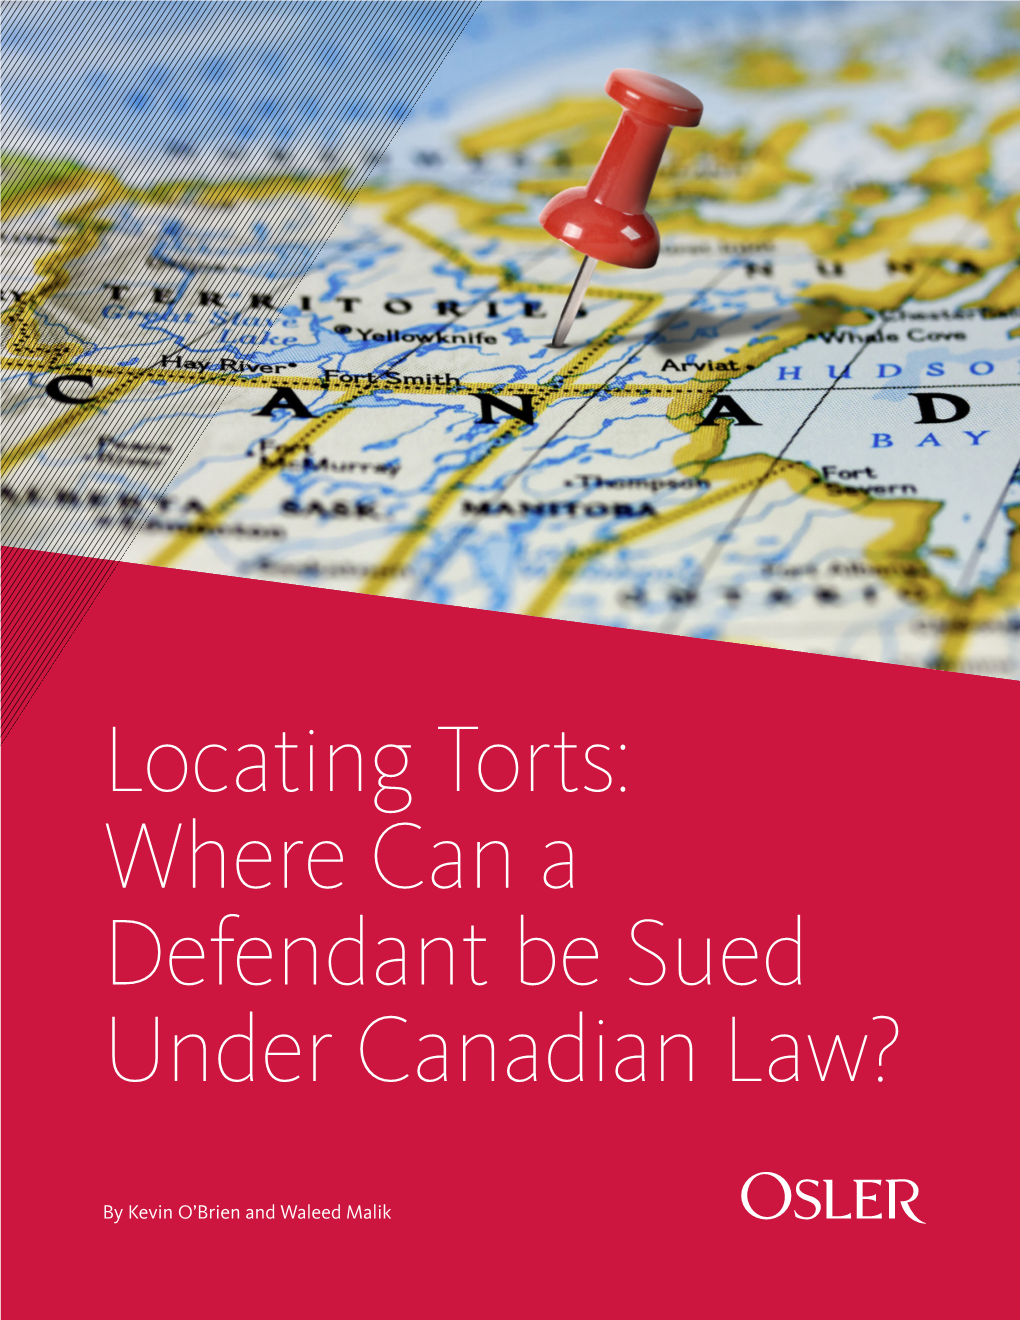 Locating Torts: Where Can a Defendant Be Sued Under Canadian Law?